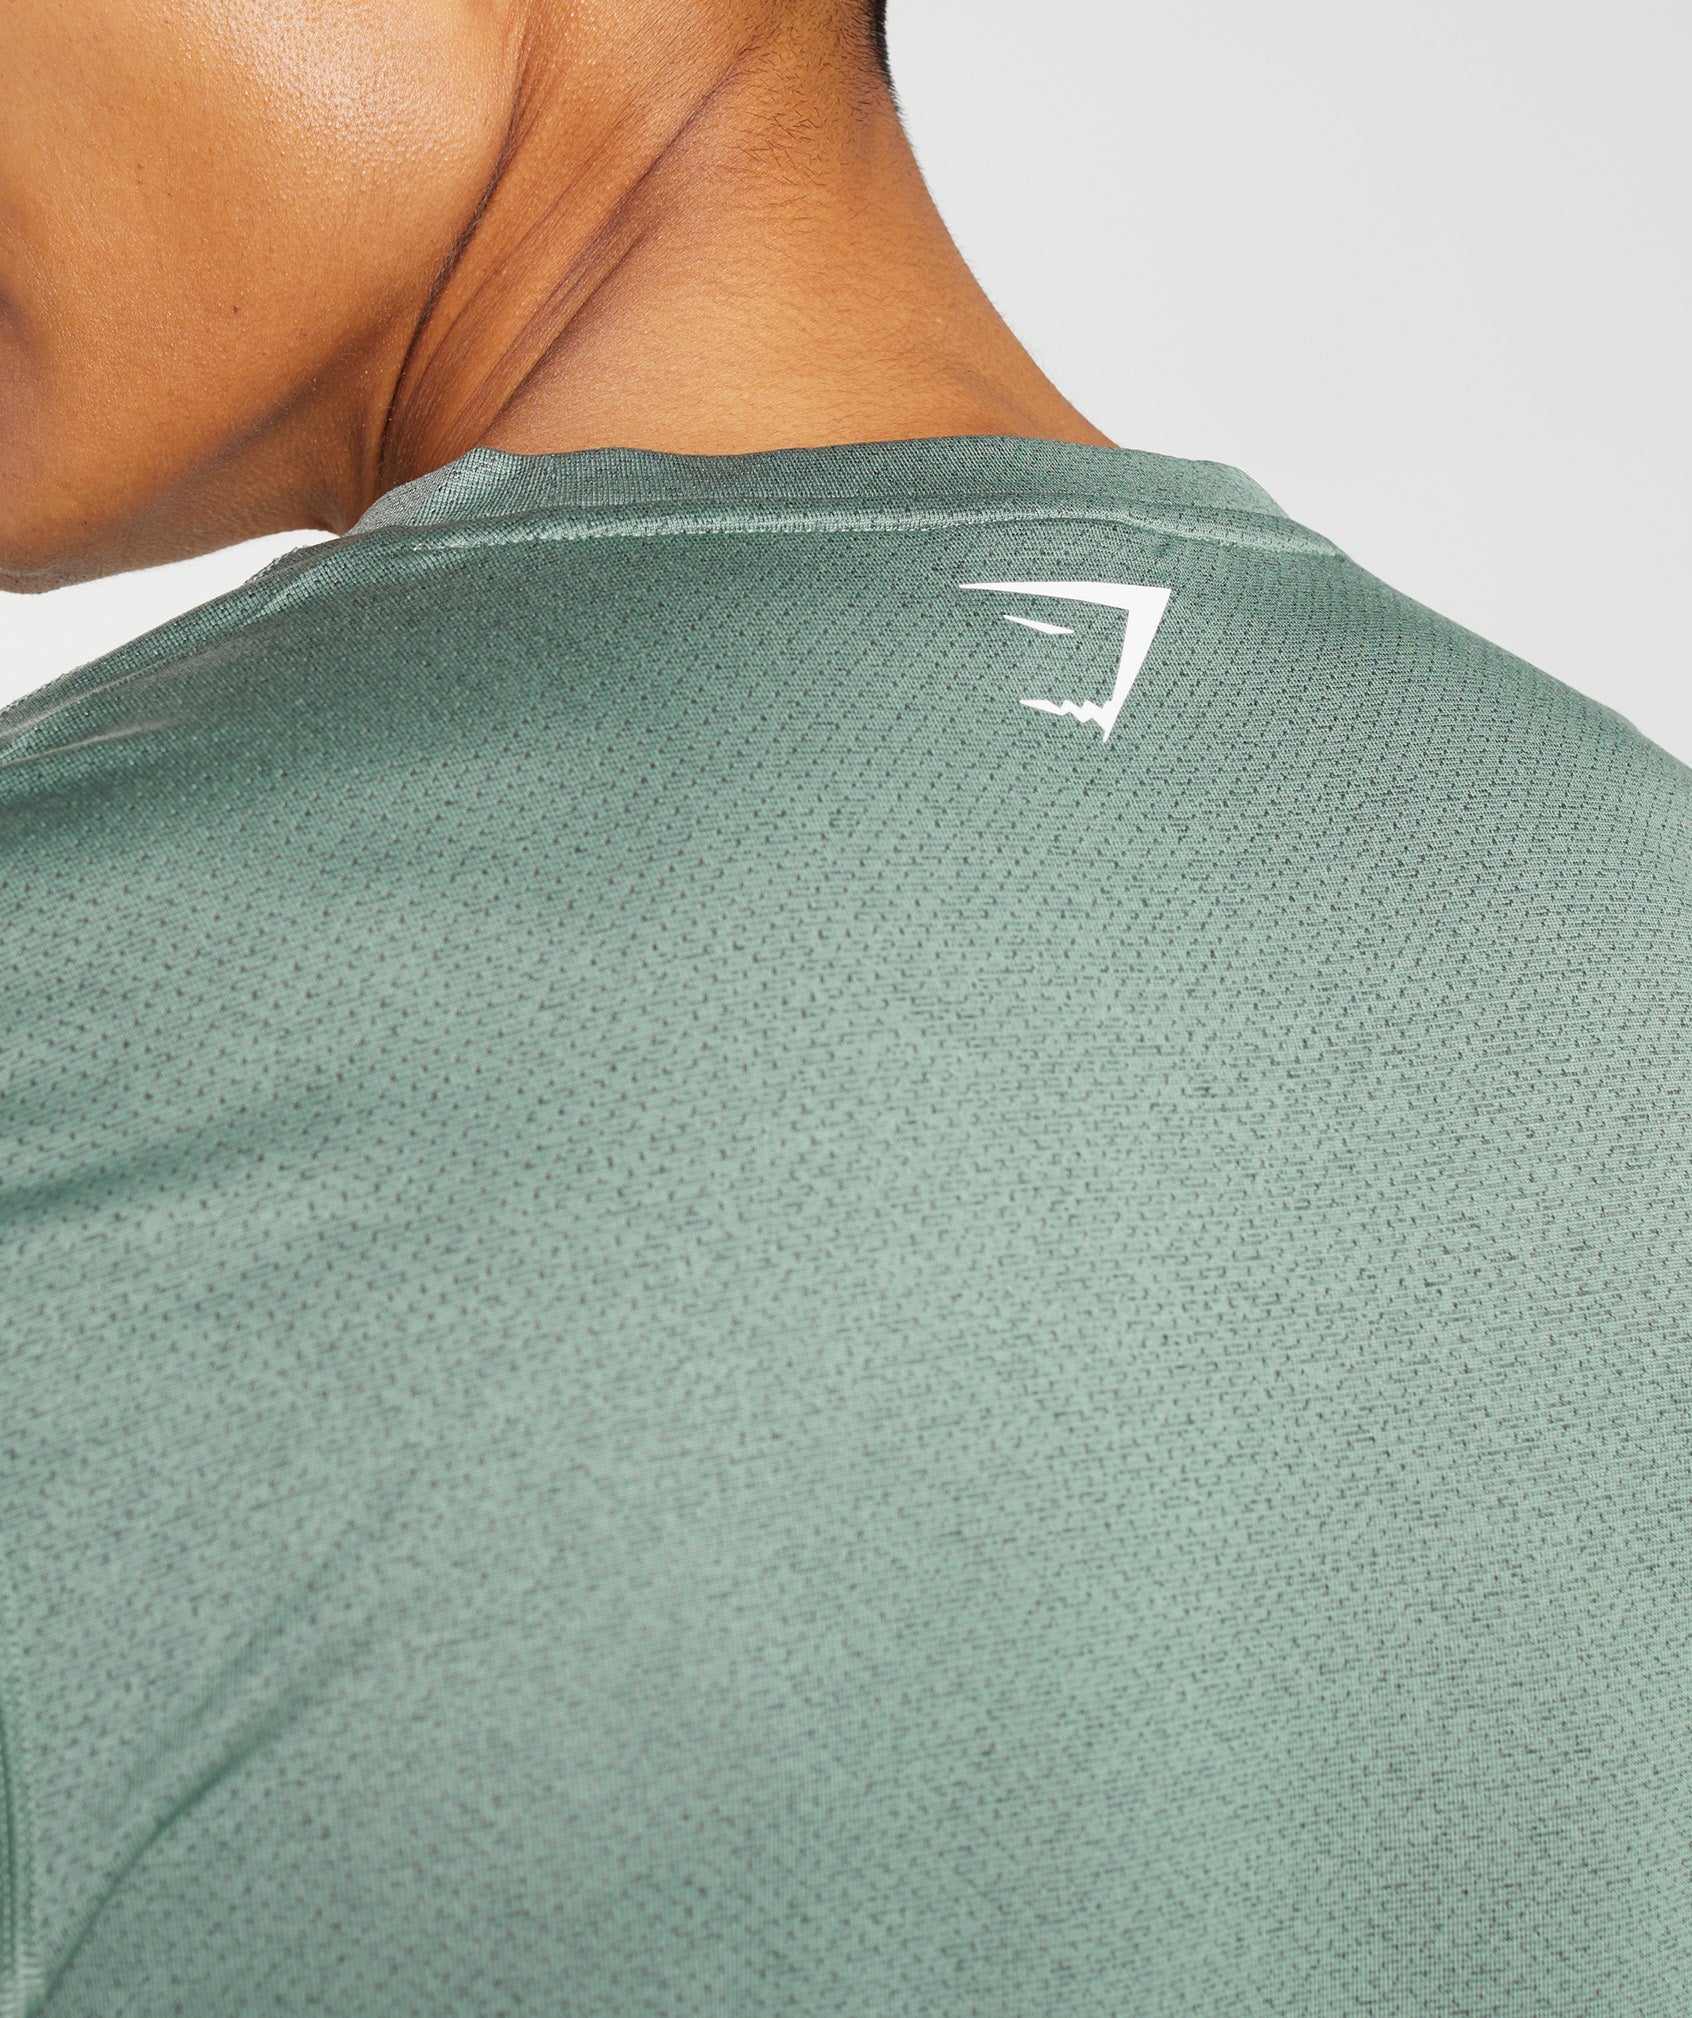 Sport T-Shirt in Willow Green/Black Marl - view 4